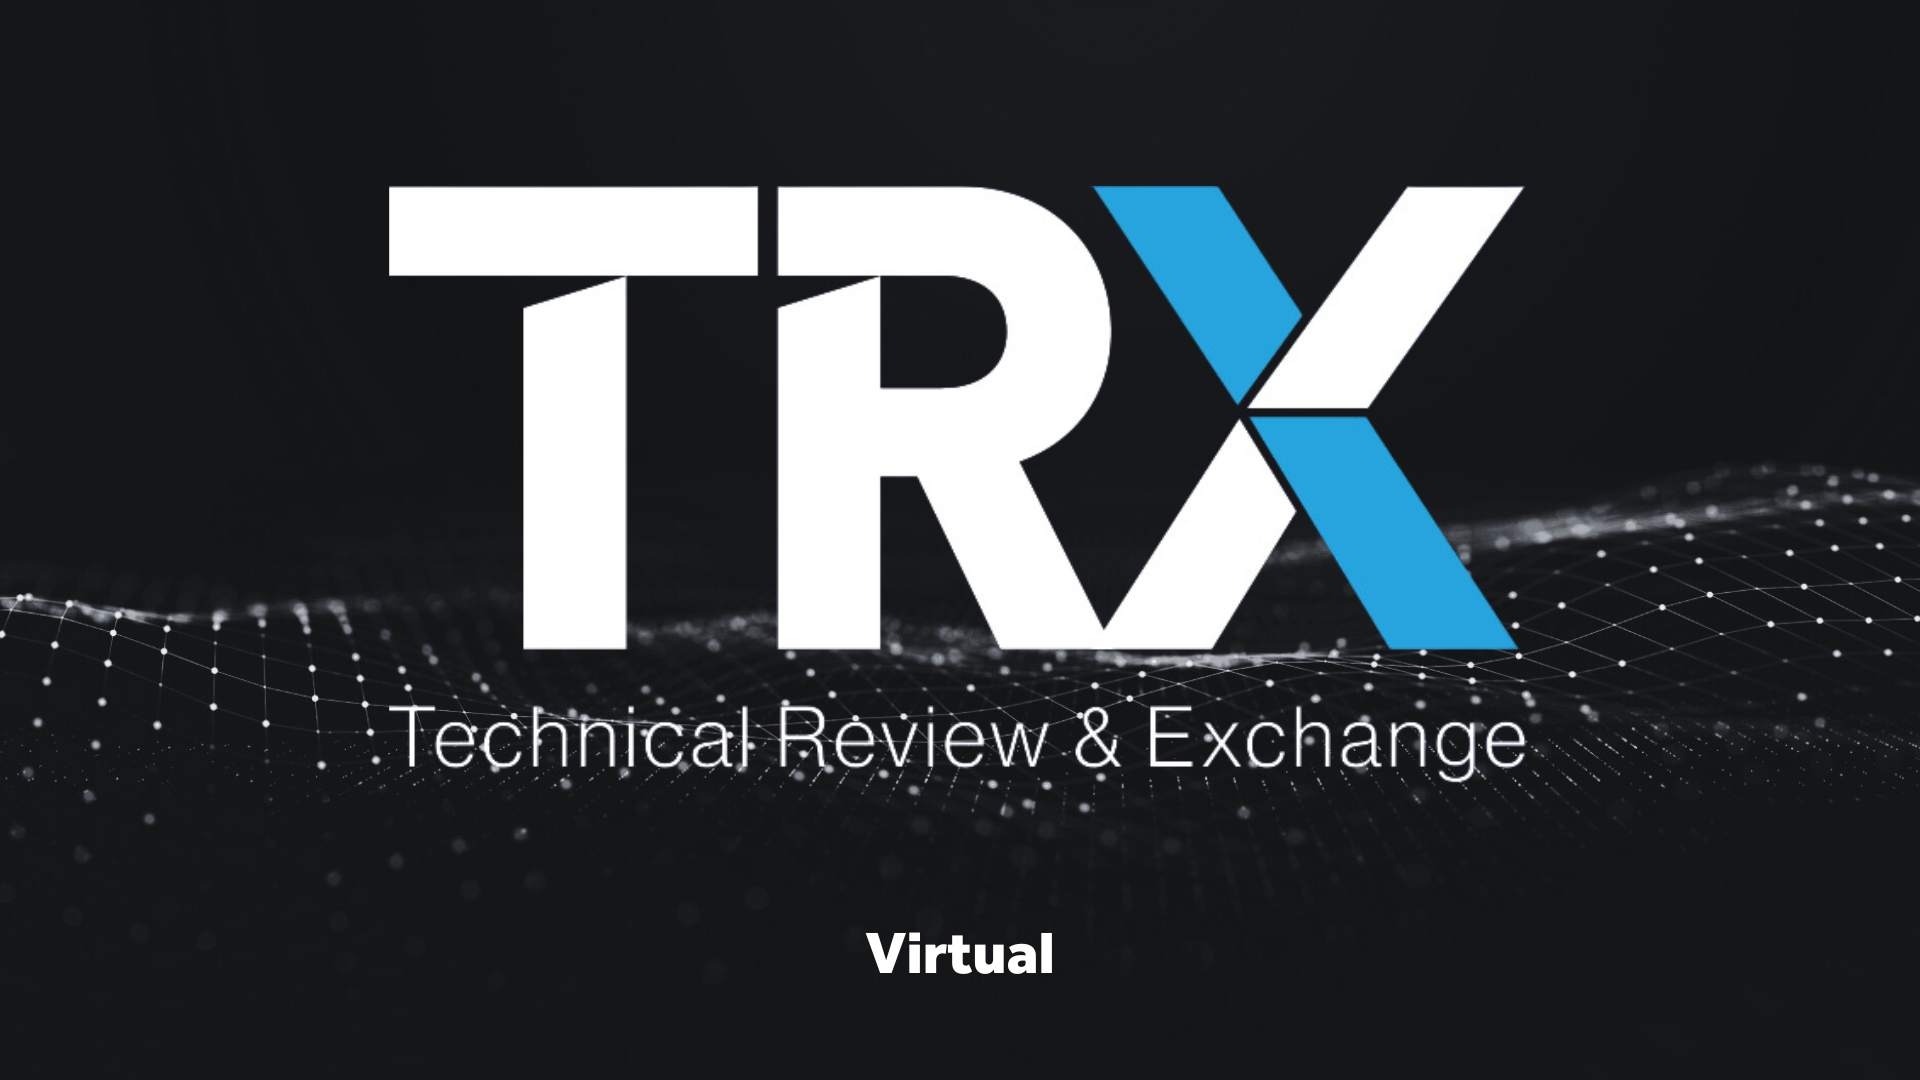 Technical Review & Exchange 2020 - Virtual